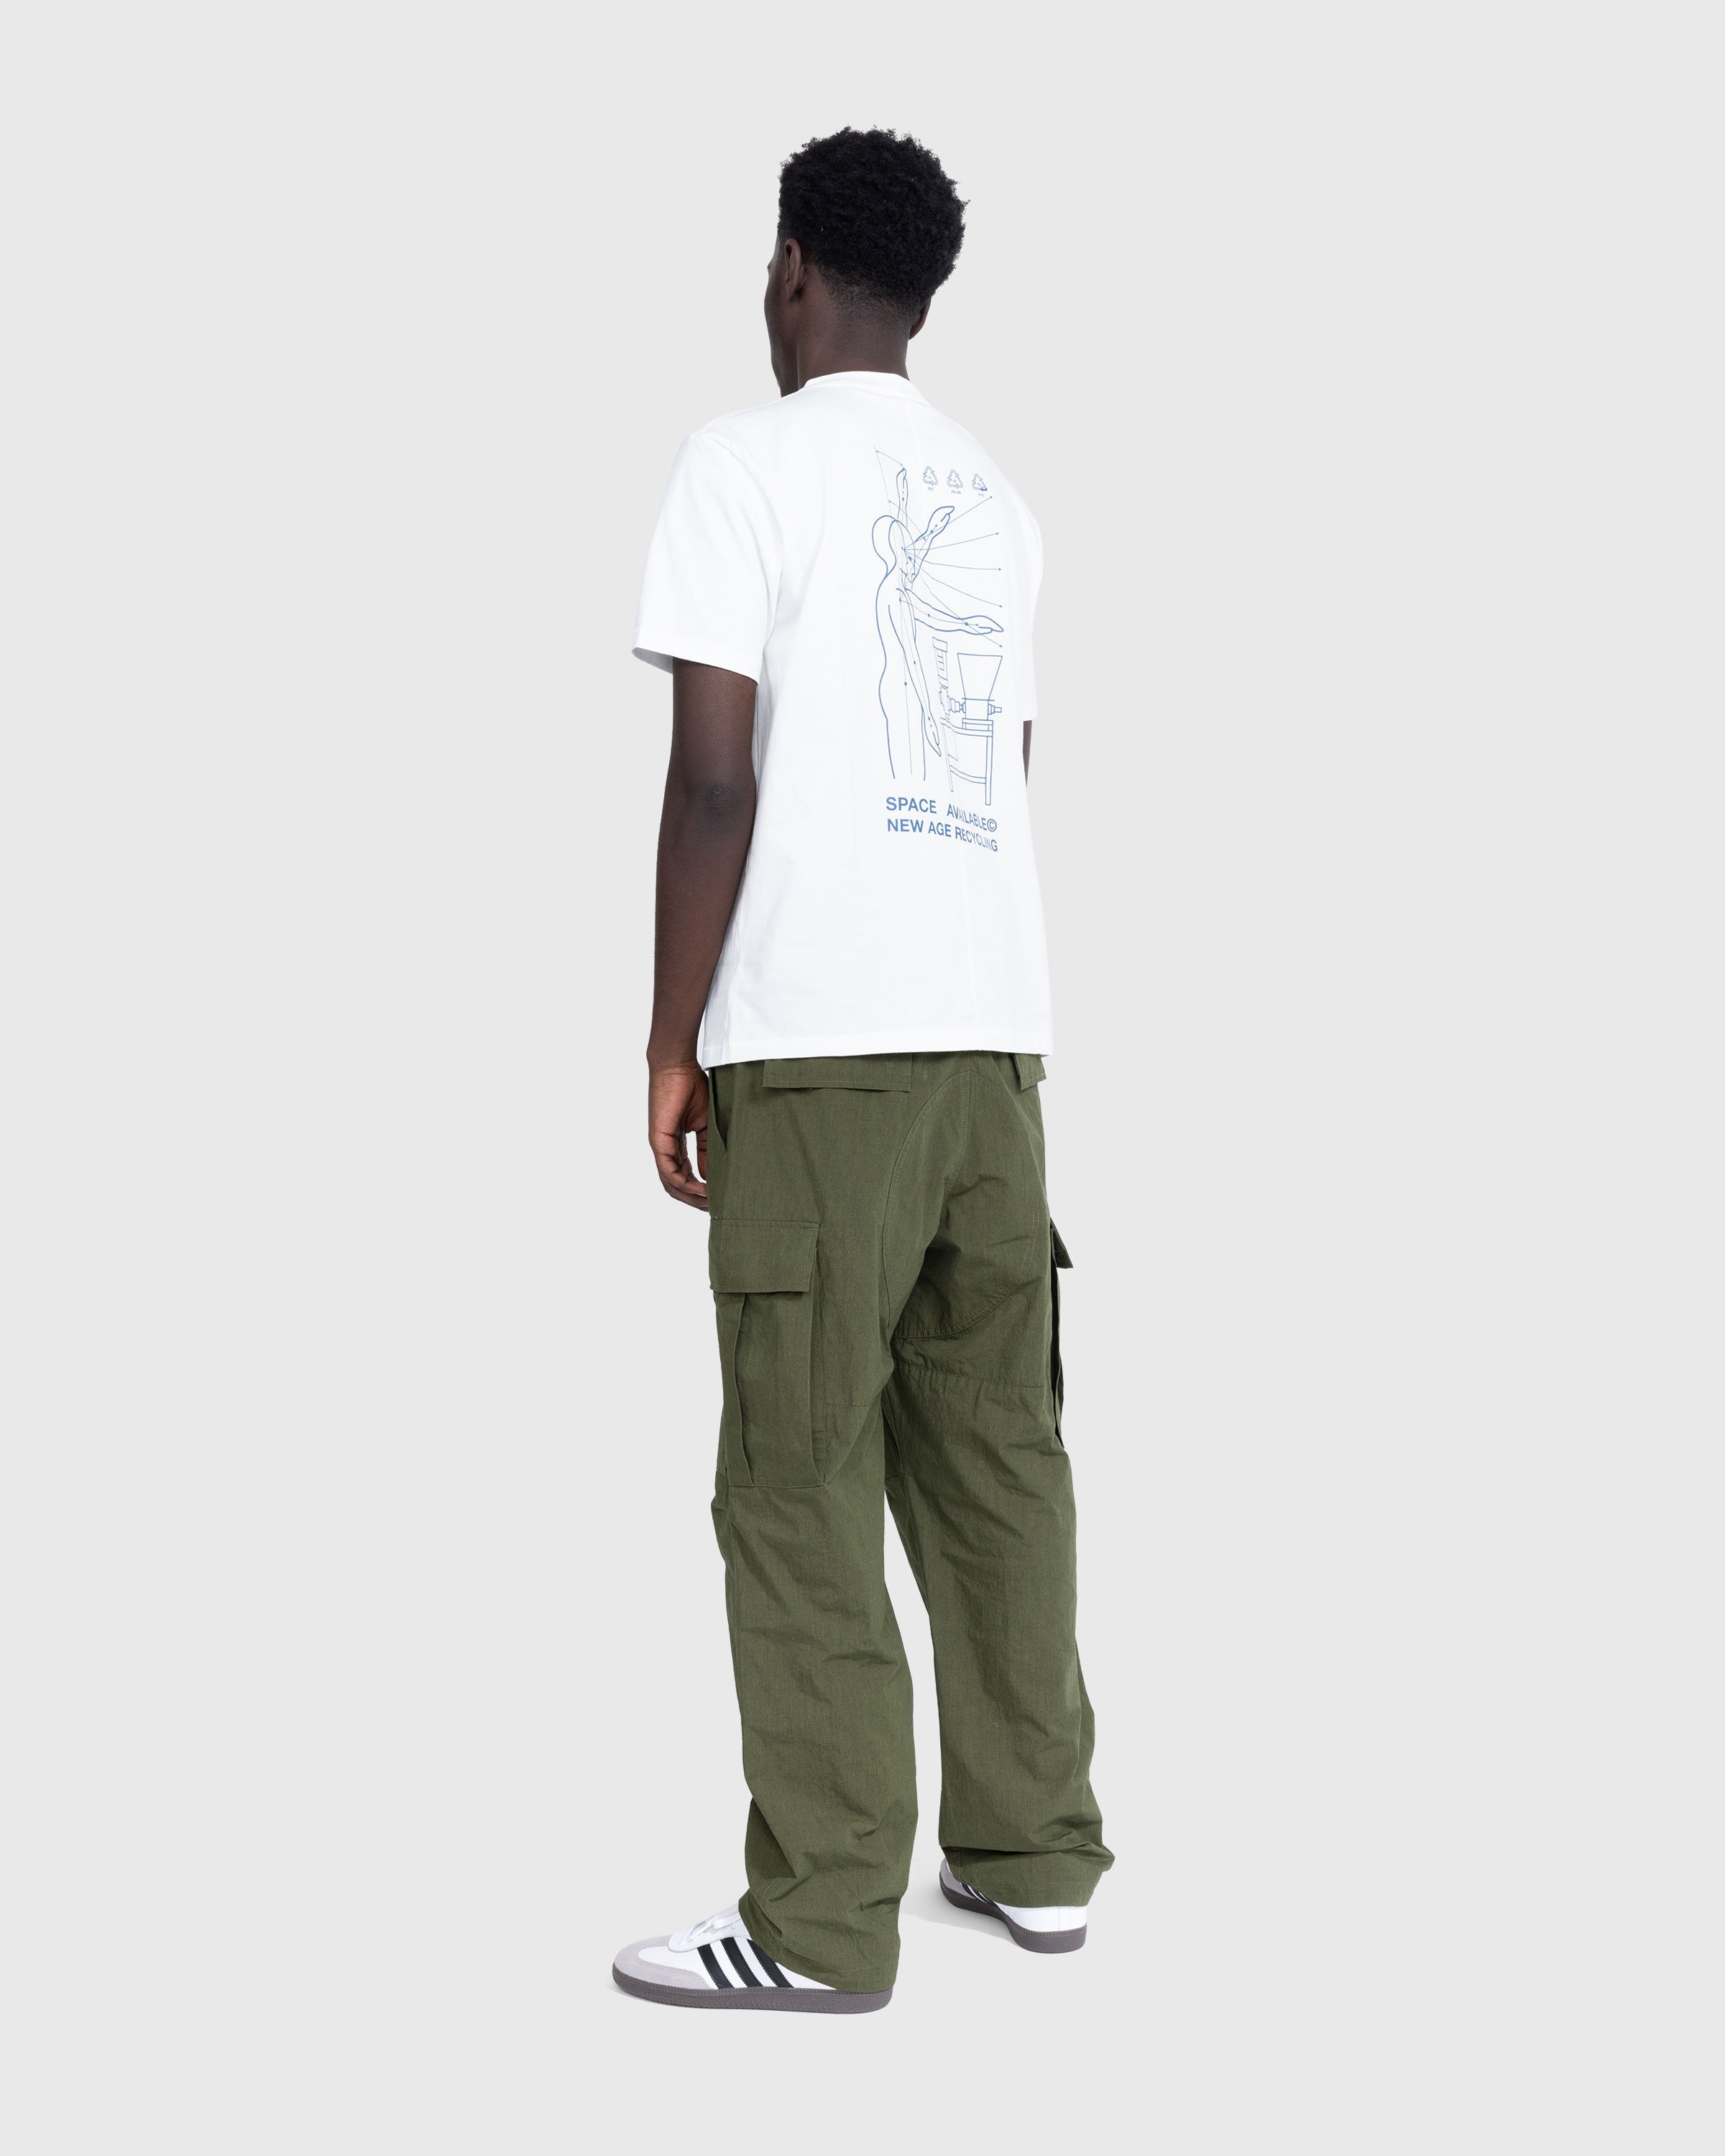 Space Available Studio – Circular Industries T-Shirt White - Tops - White - Image 5